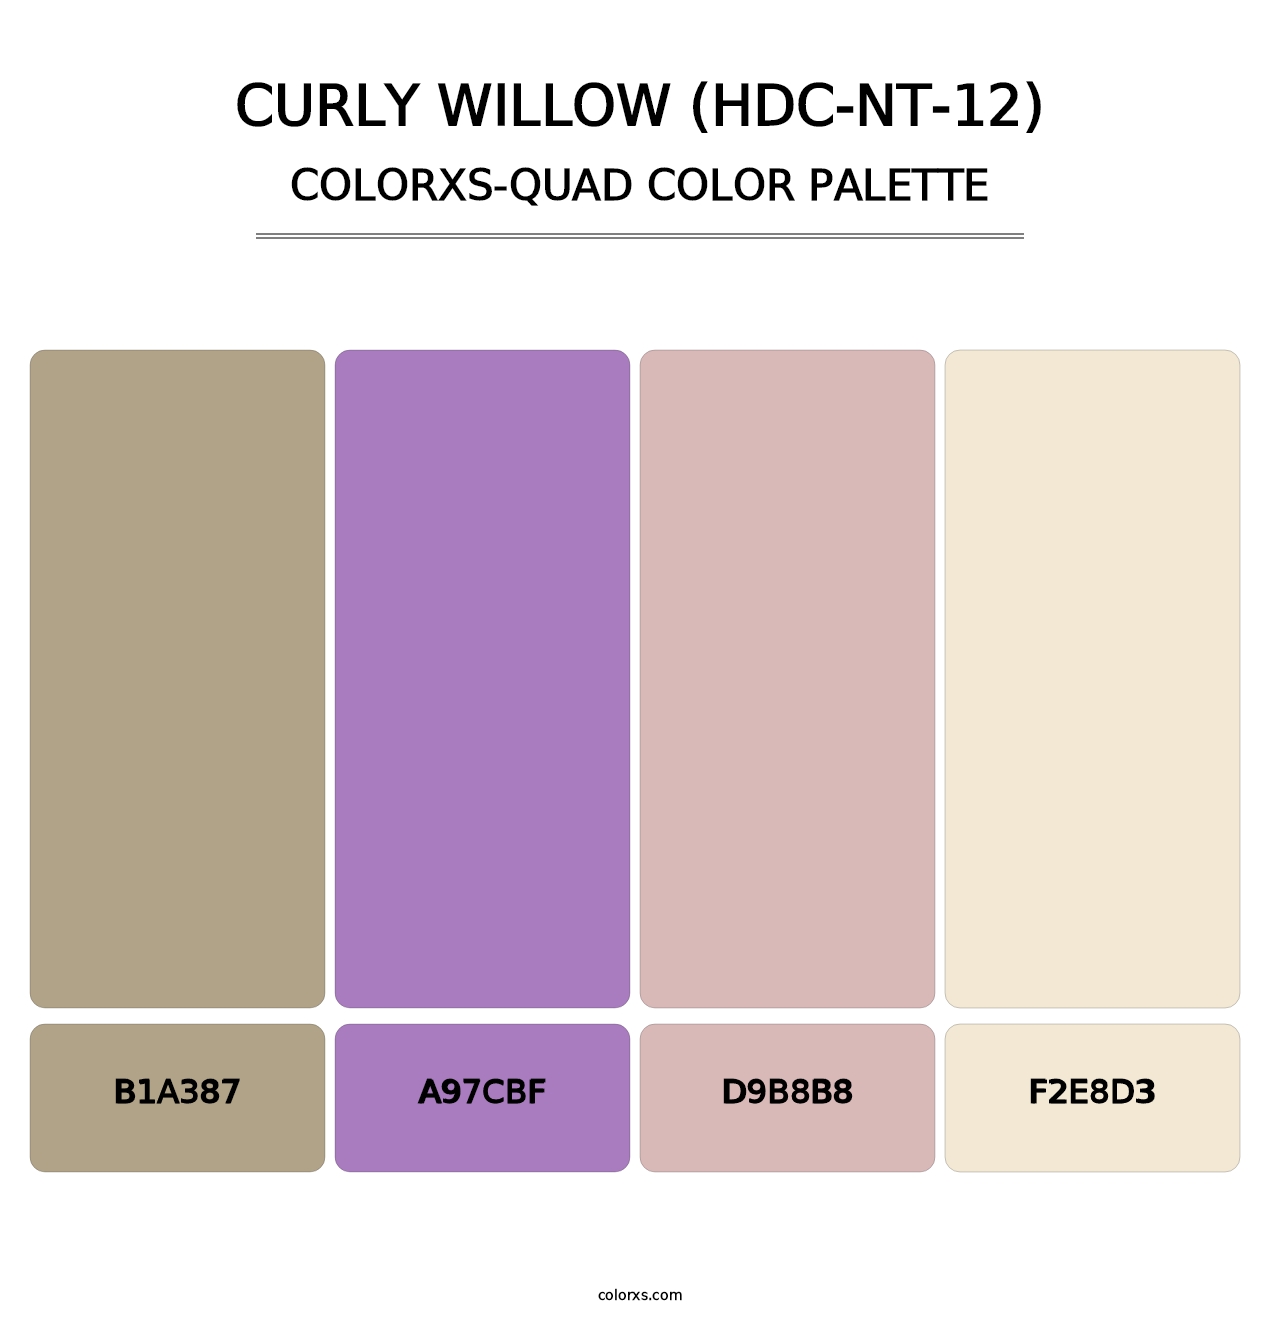 Curly Willow (HDC-NT-12) - Colorxs Quad Palette